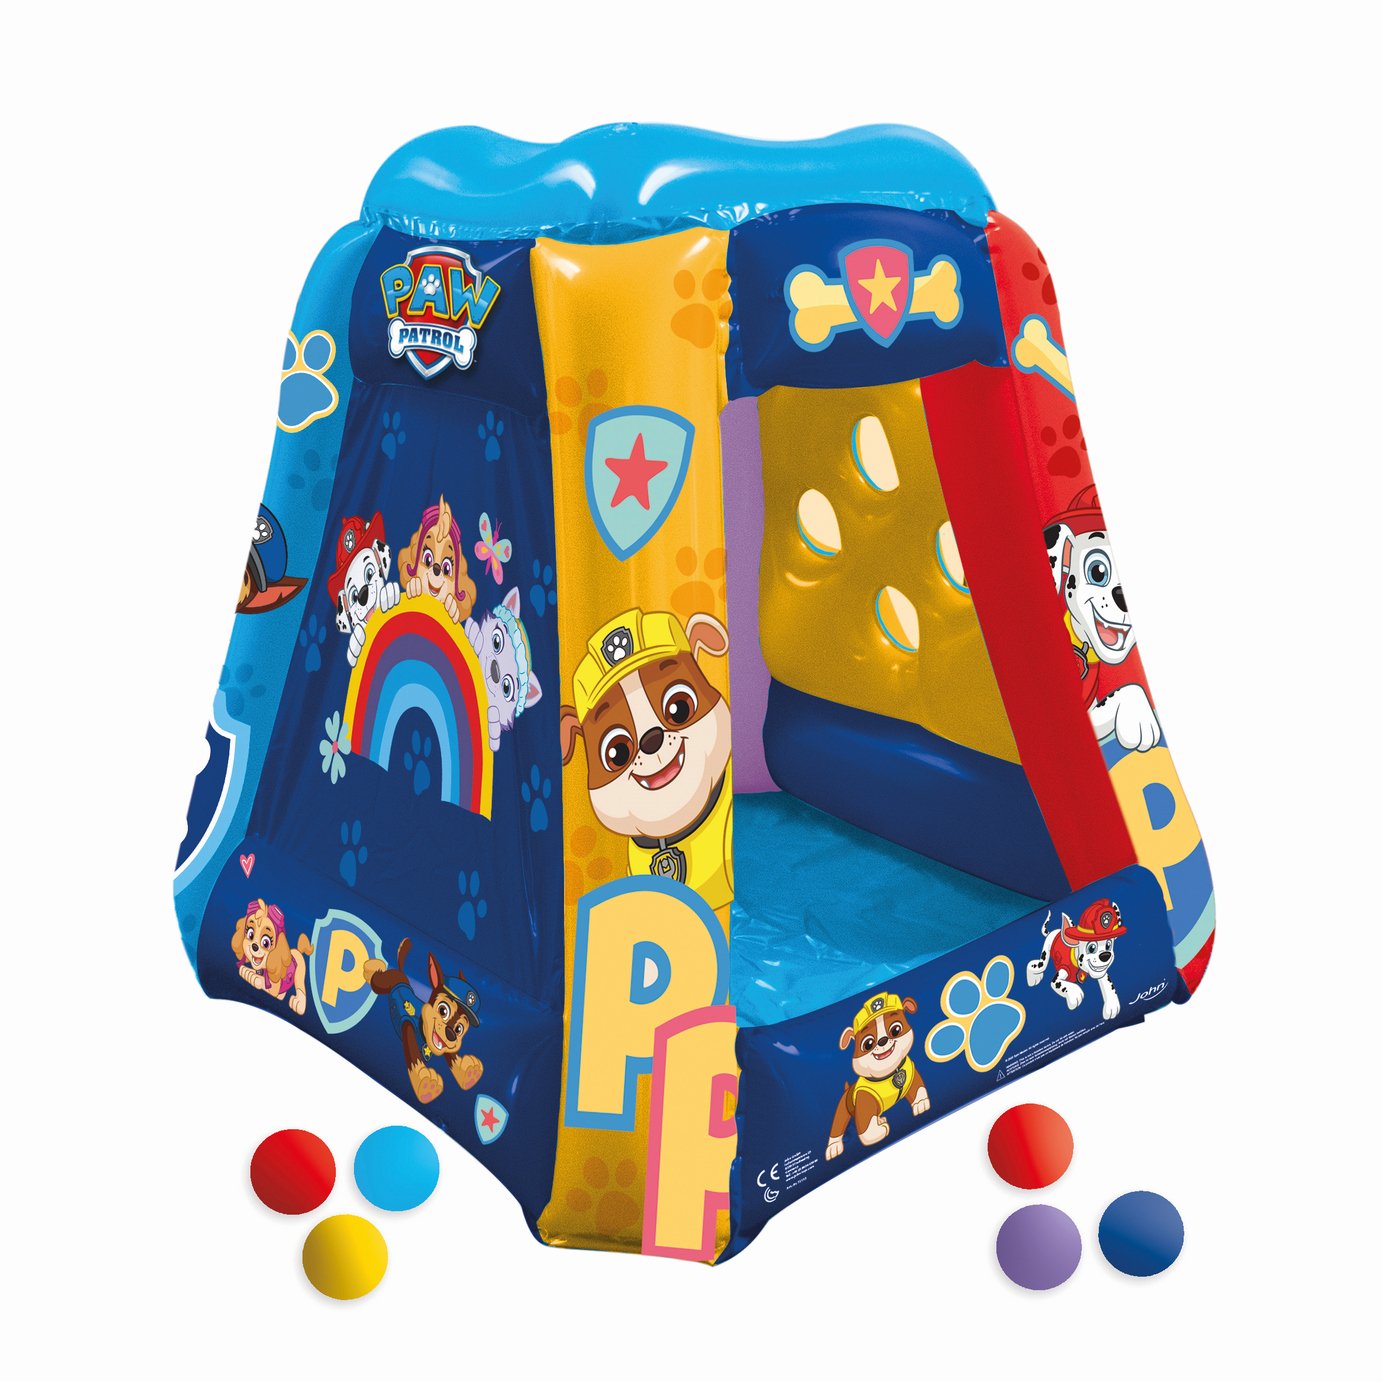 PAW Patrol Inflatable Ball Pit with 20 Balls review